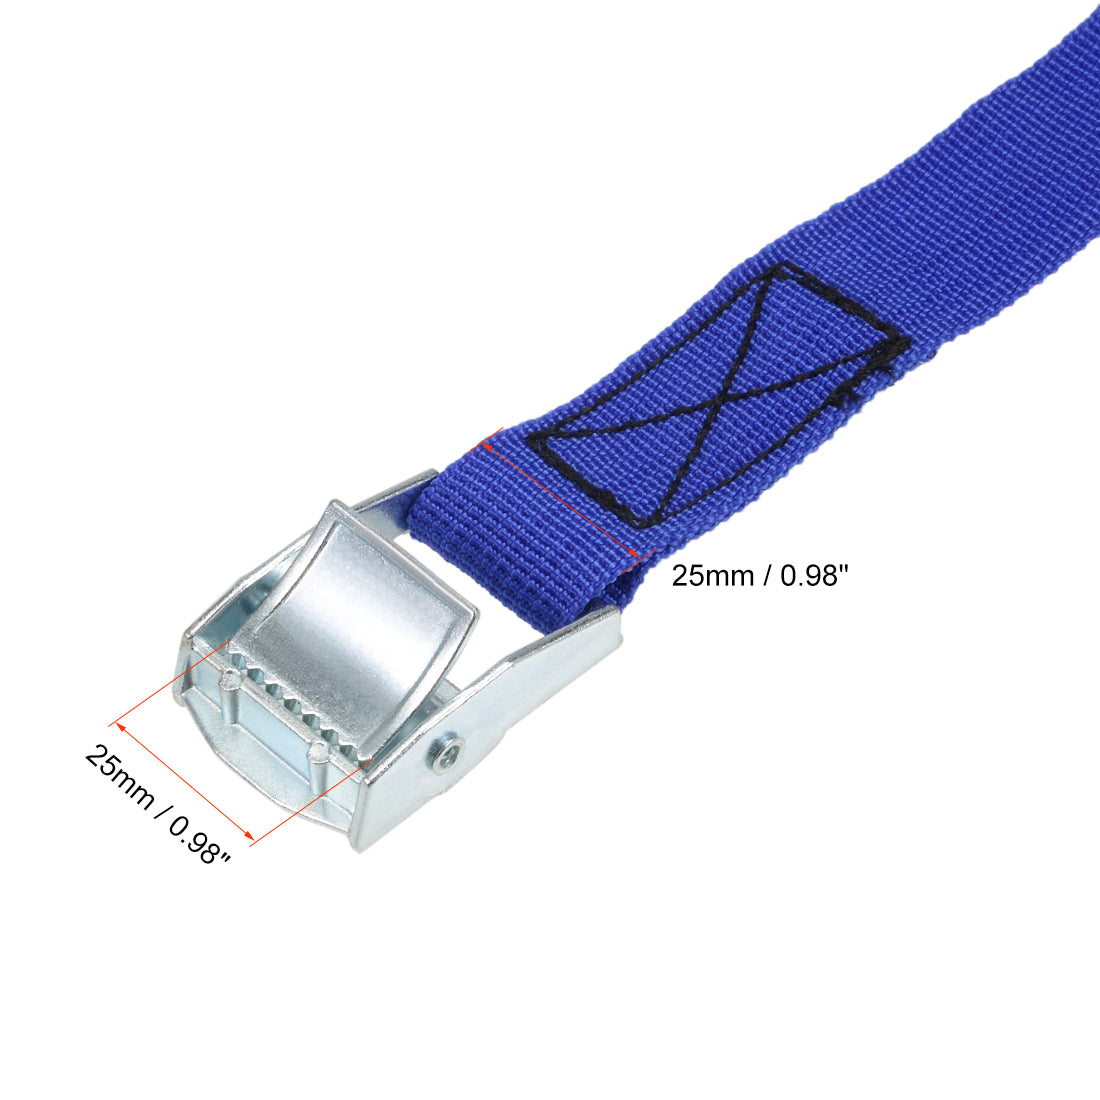 uxcell Uxcell 1M x 25mm Lashing Strap Cargo Tie Down Straps w Cam Lock Buckle 250Kg Work Load, Blue, 4Pcs